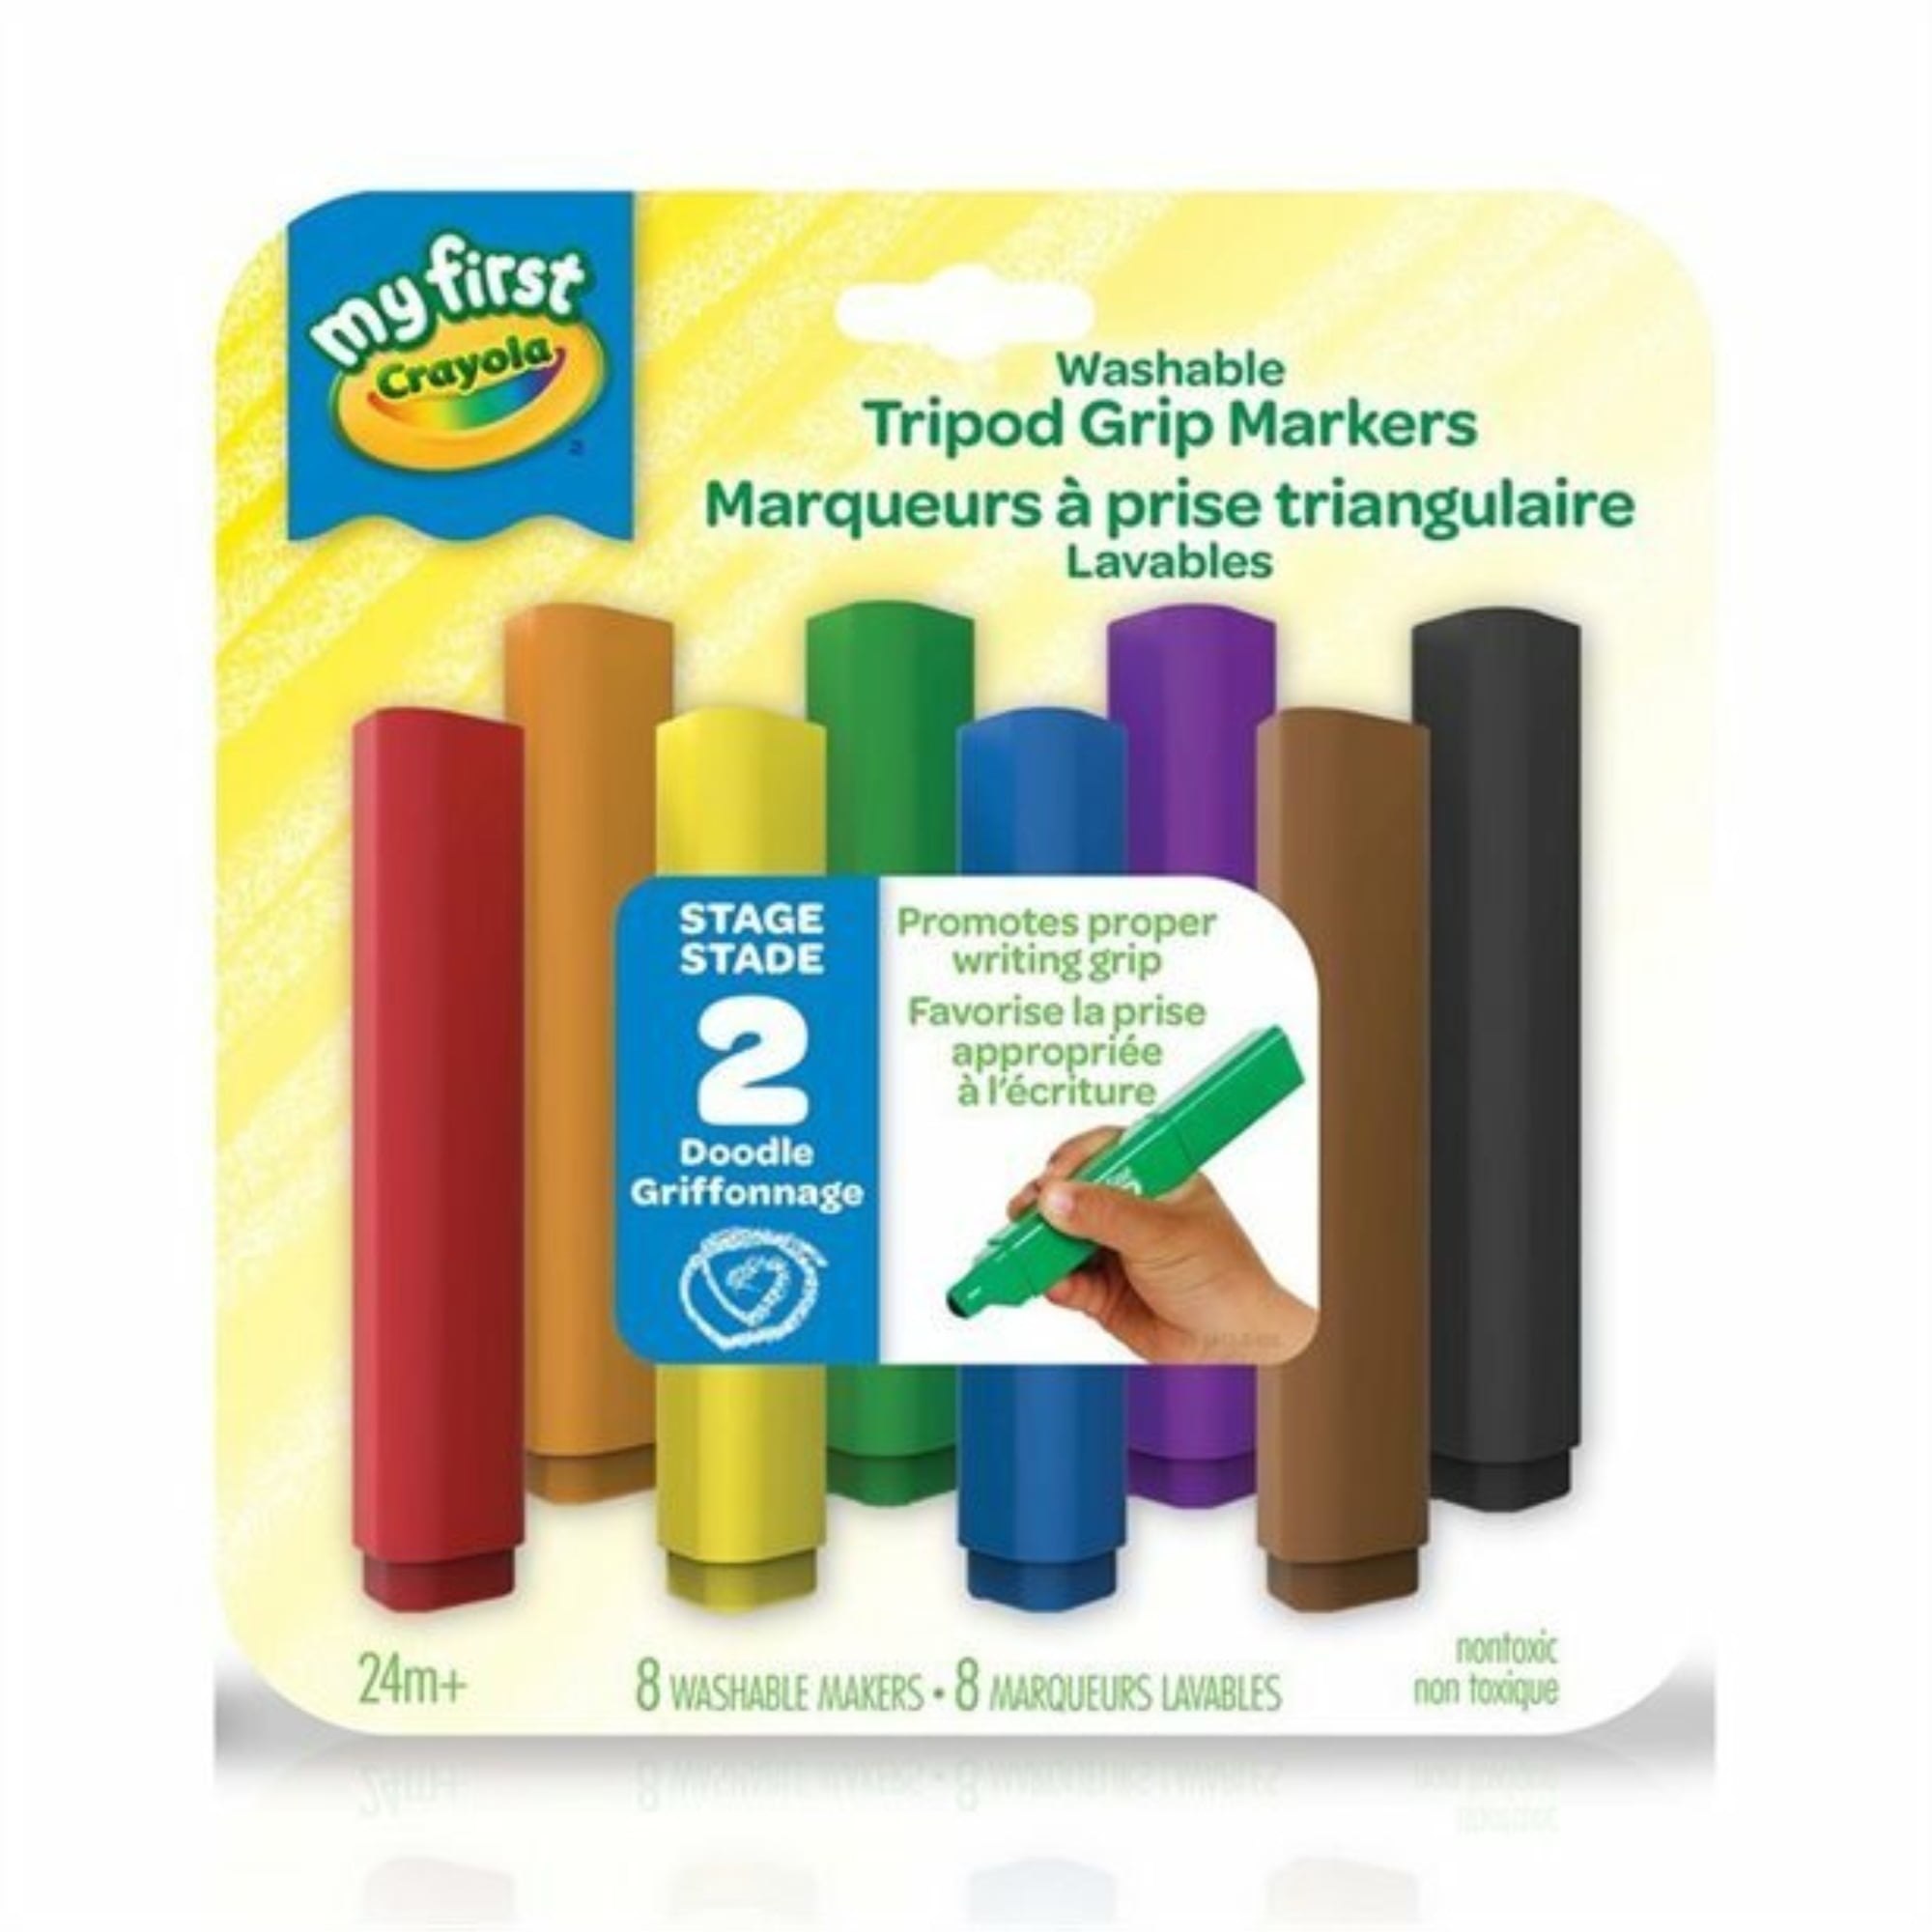 Crayola Pip Squeaks Marker Set (65ct), Washable Markers for Kids, Kids Art  Supplies, Travel Gift for Kids, Mini Markers, 4+